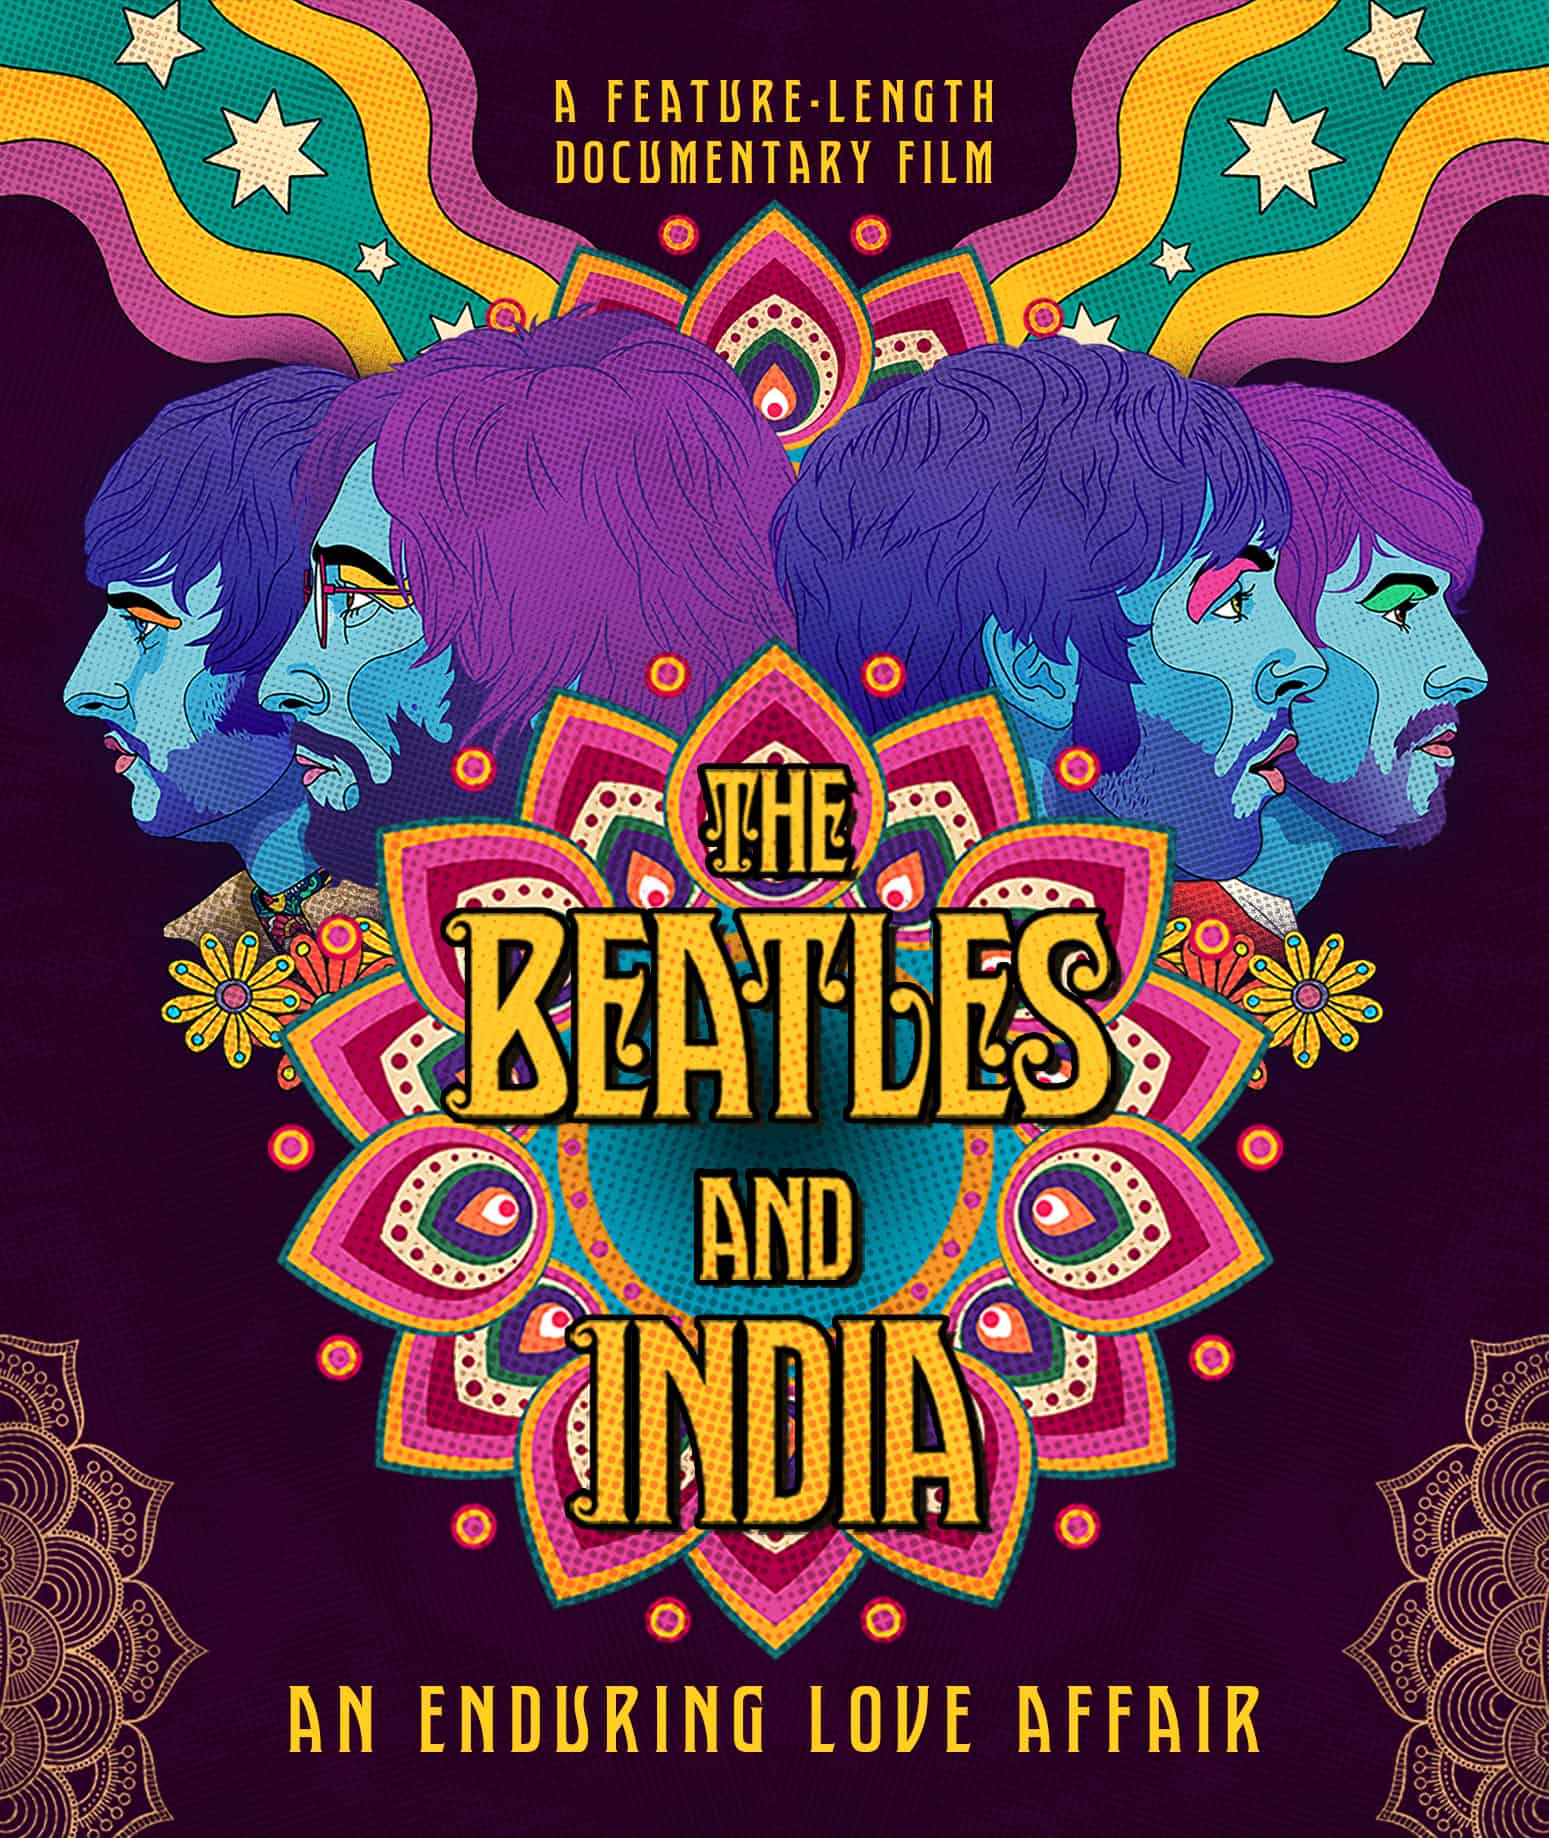 The Beatles and India Movie Love Memorial Day